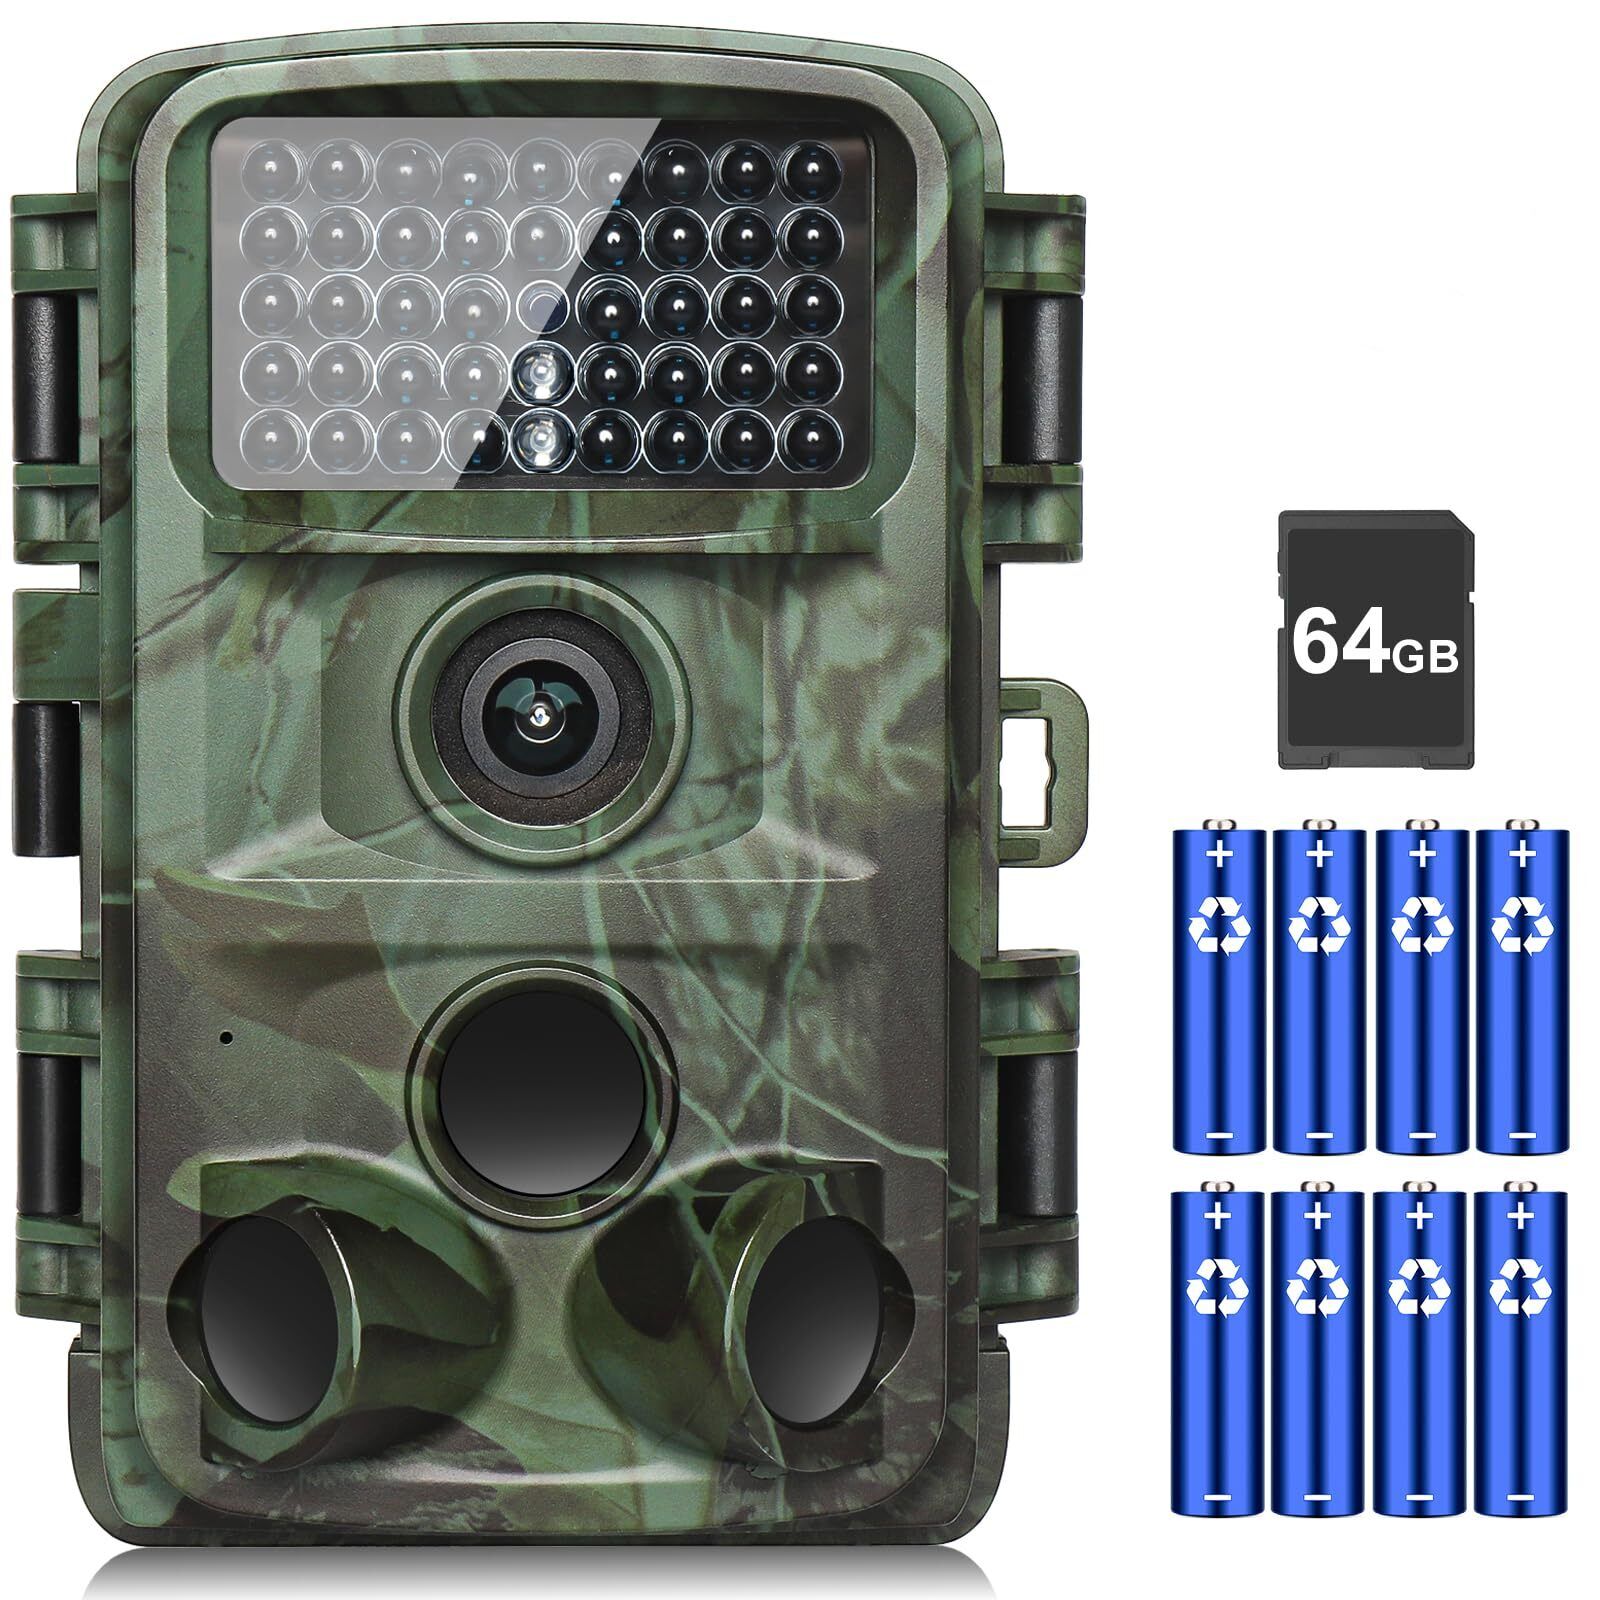 KJK Trail Camera - 4K 64MP Game Camera with Night Vision 0.05s Trigger Motion...